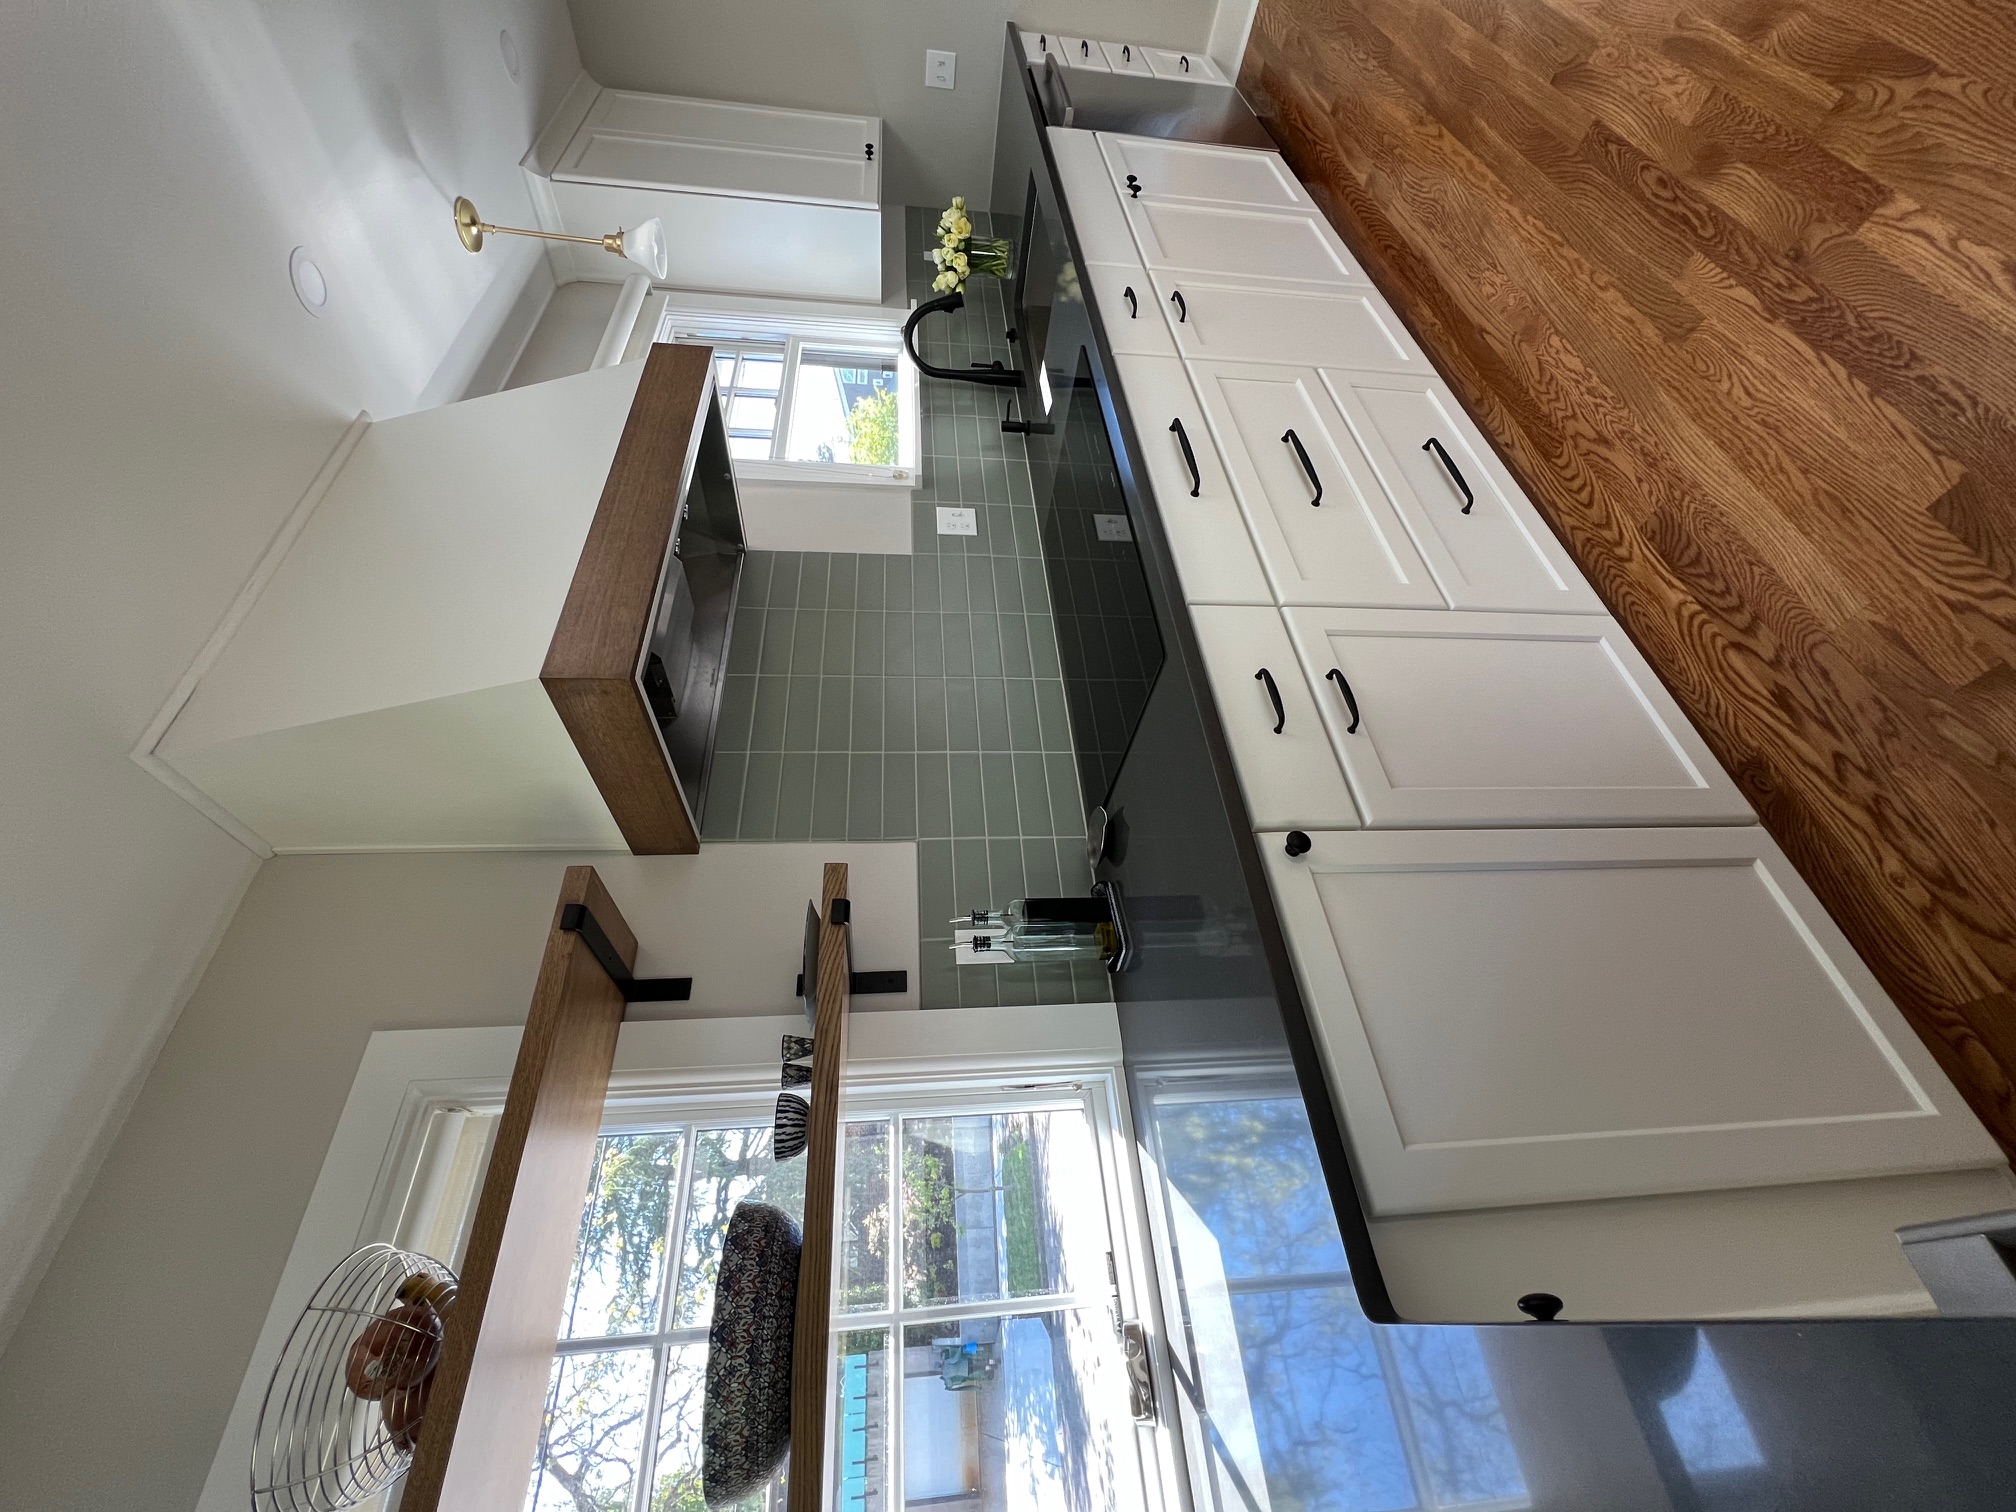 Featured image for “North Seattle Kitchen”